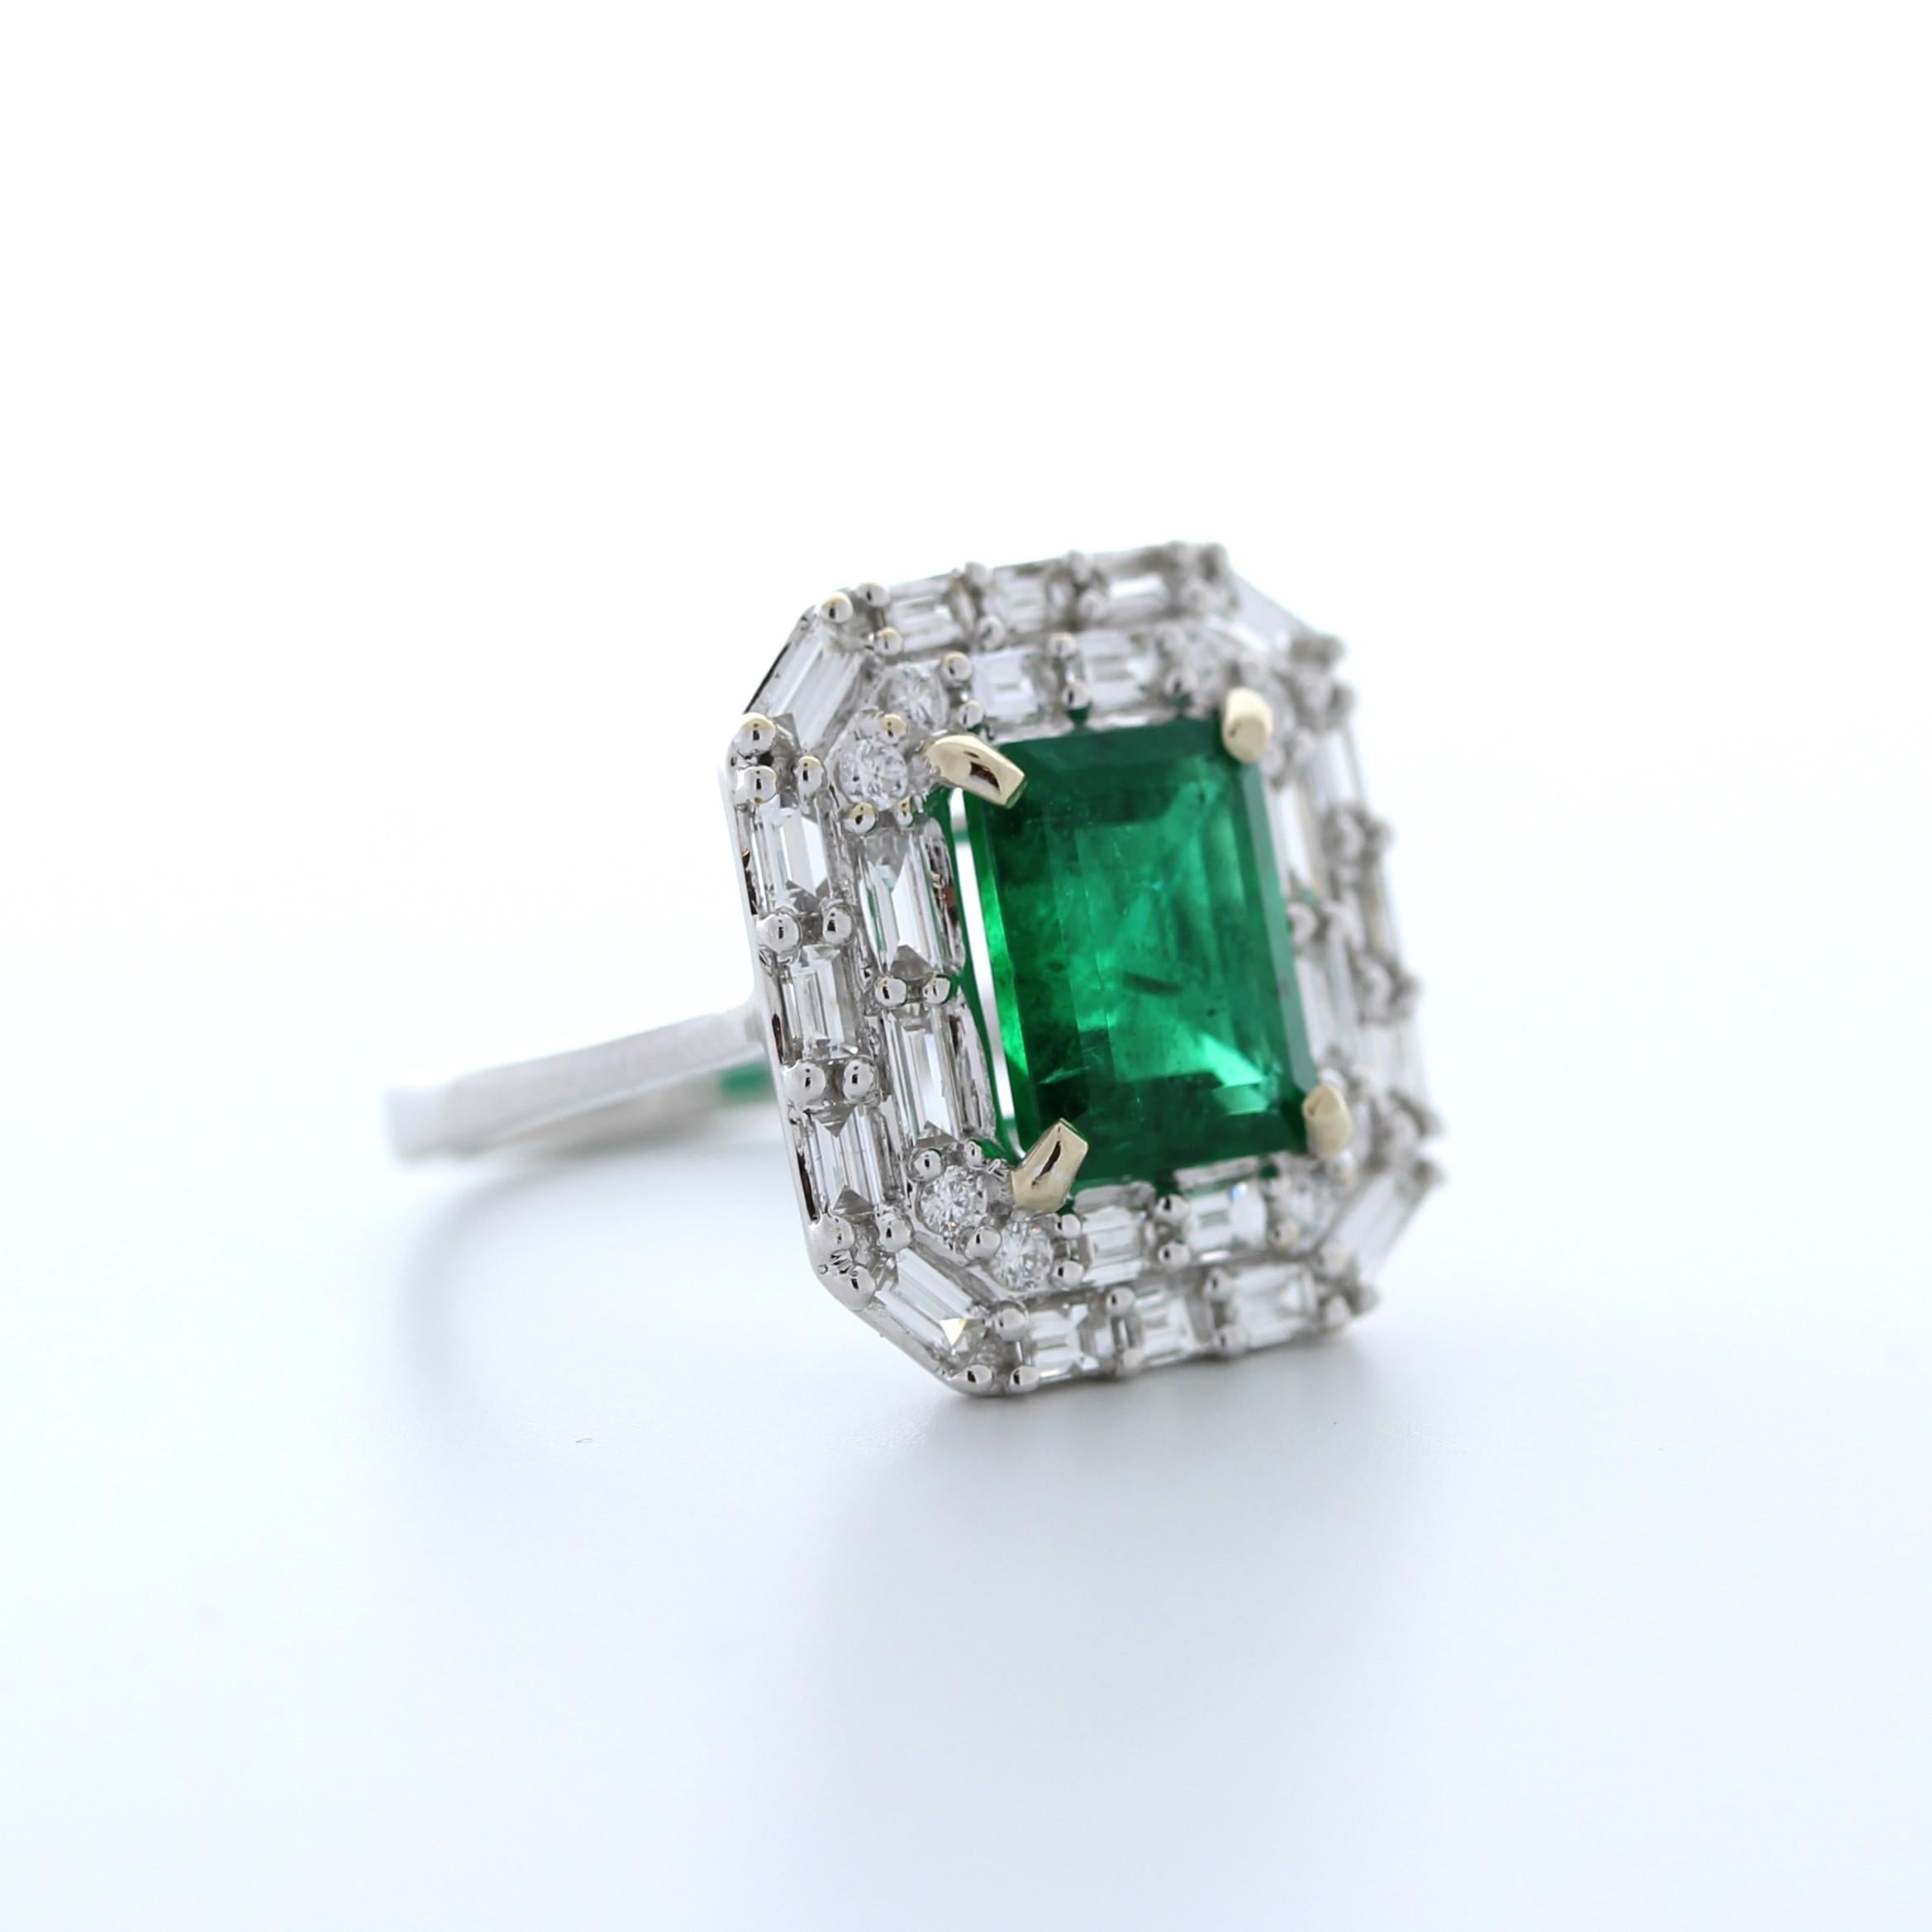 This breathtaking 3.37 carat weight green emerald fashion ring is truly a statement piece. Set in luxurious 18K white gold, the vivid green emerald commands attention with its intense color and exceptional clarity. The emerald is complemented by 32